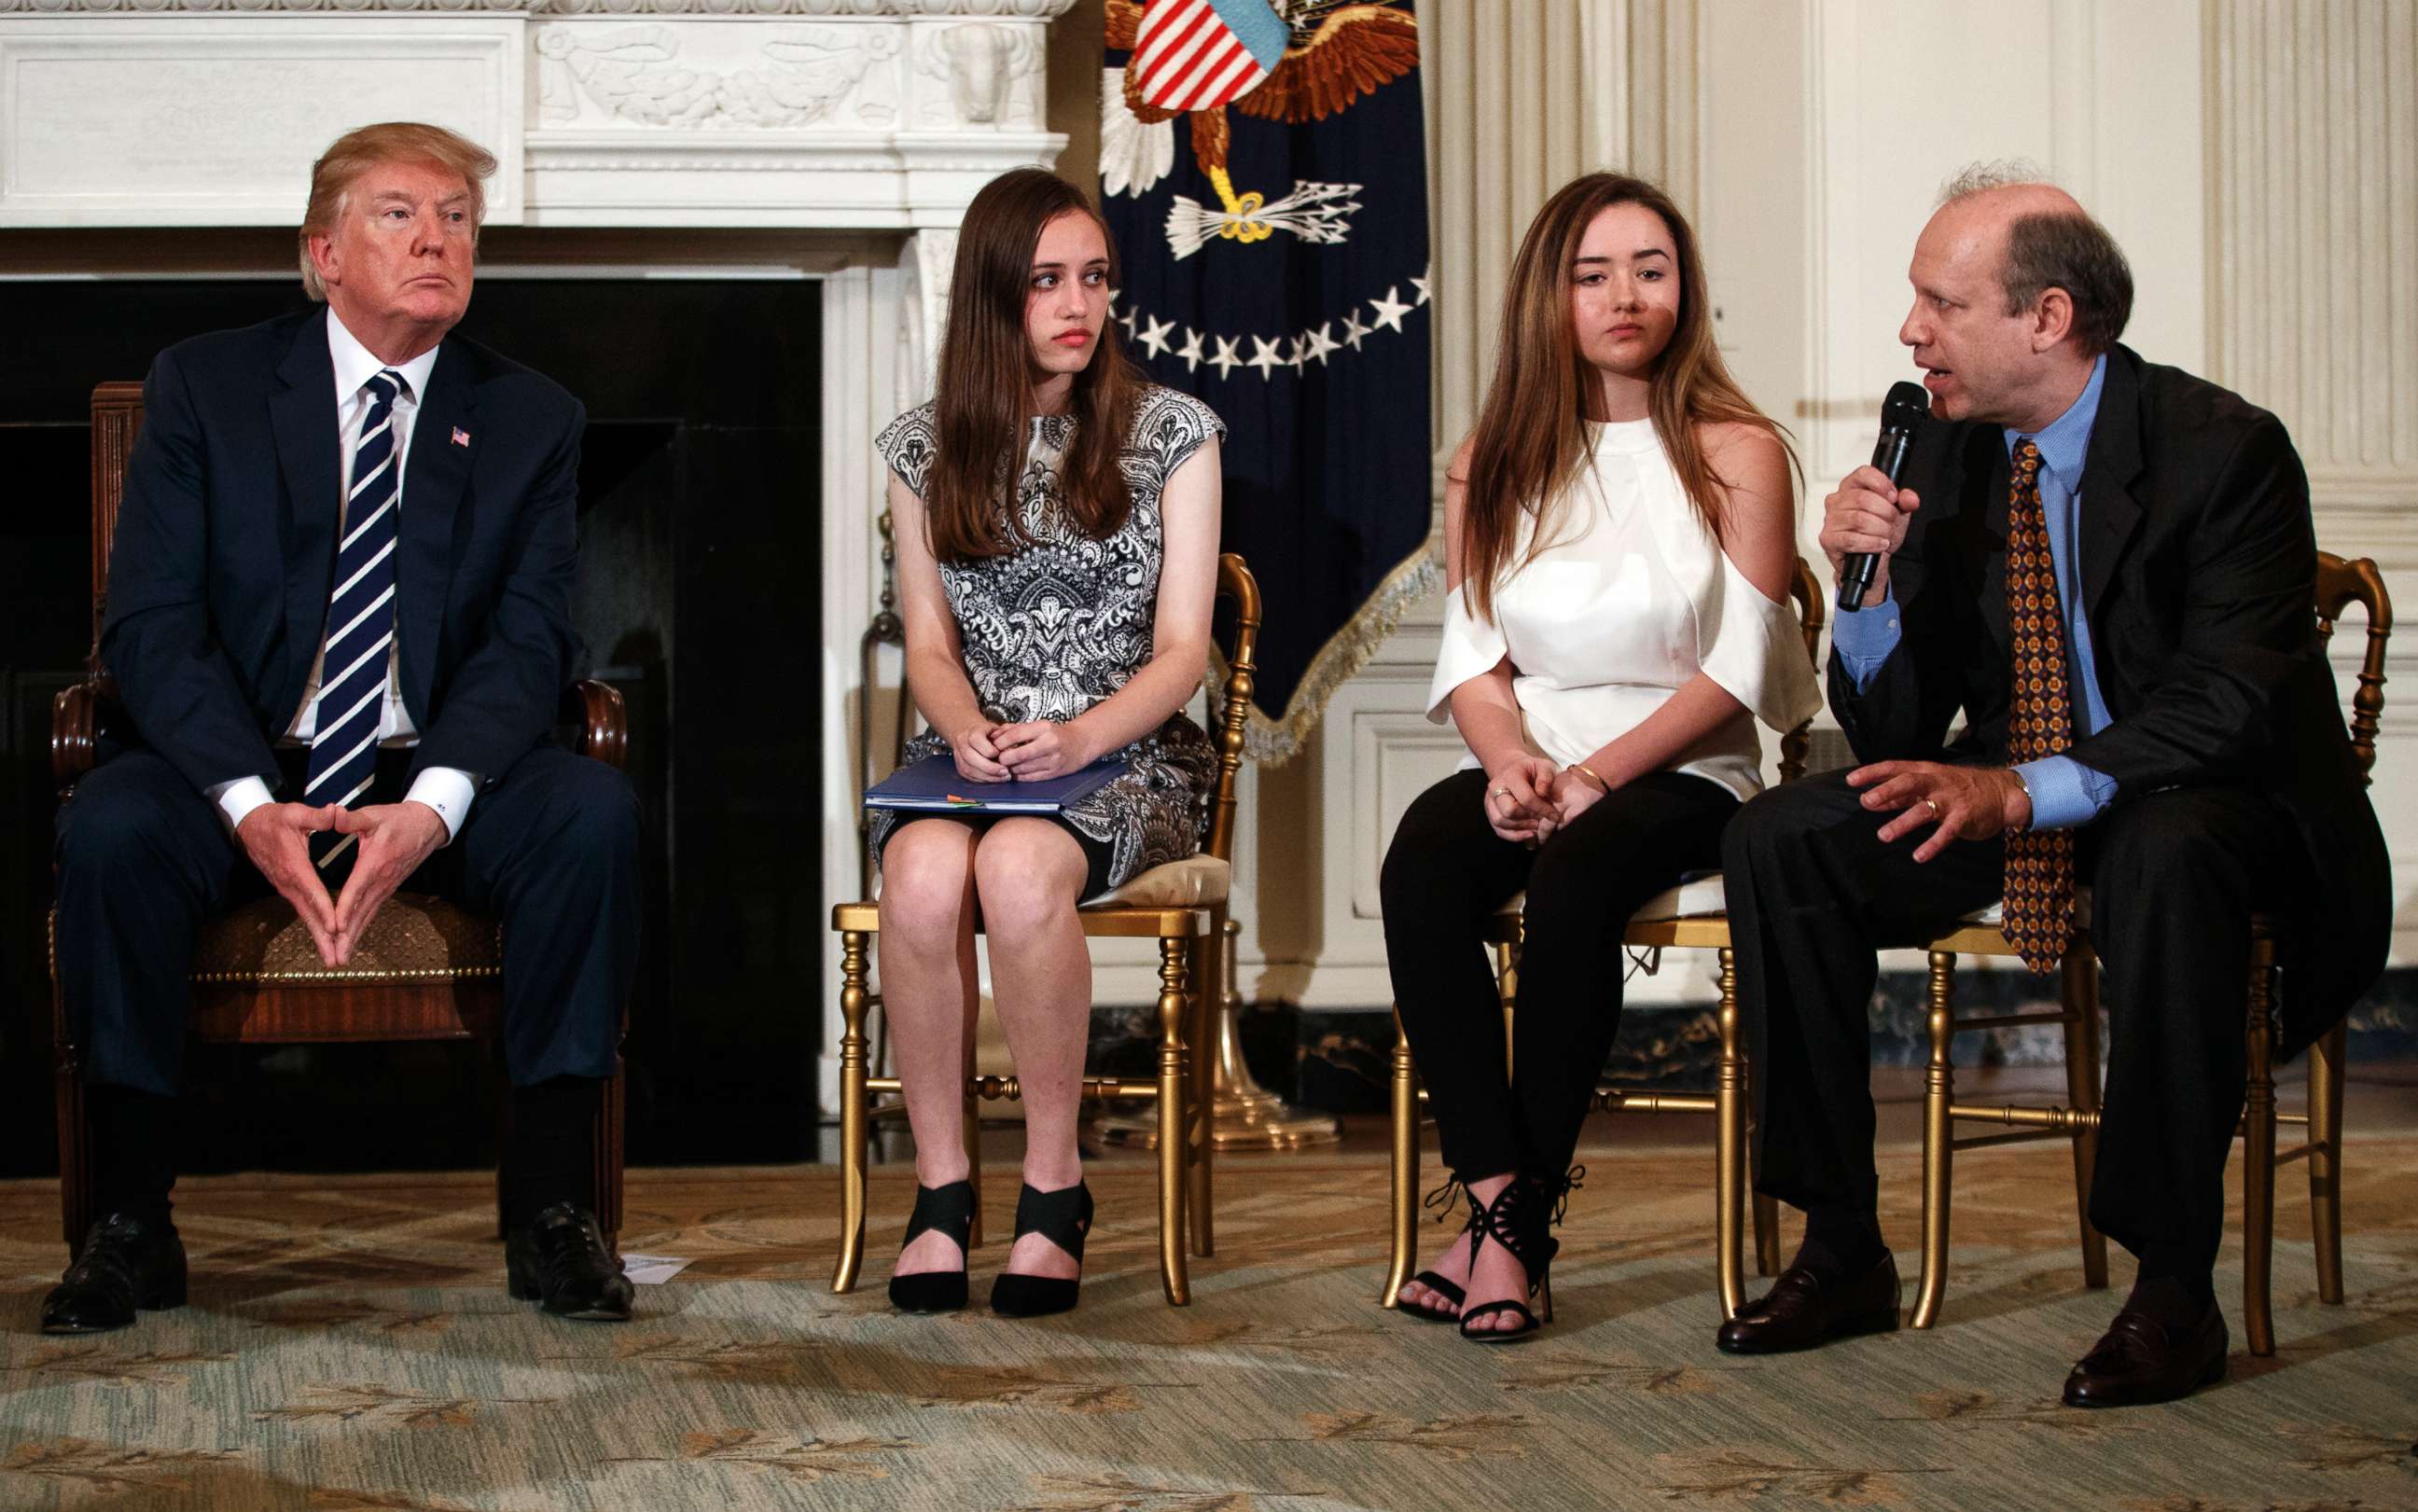 PHOTO: From left, President Donald Trump, Marjory Stoneman Douglas High School students Carson Abt and Ariana Klein, listen as Carson's father Frederick Abt, speaks in the State Dining Room of the White House in Washington, D.C., Feb. 21, 2018.